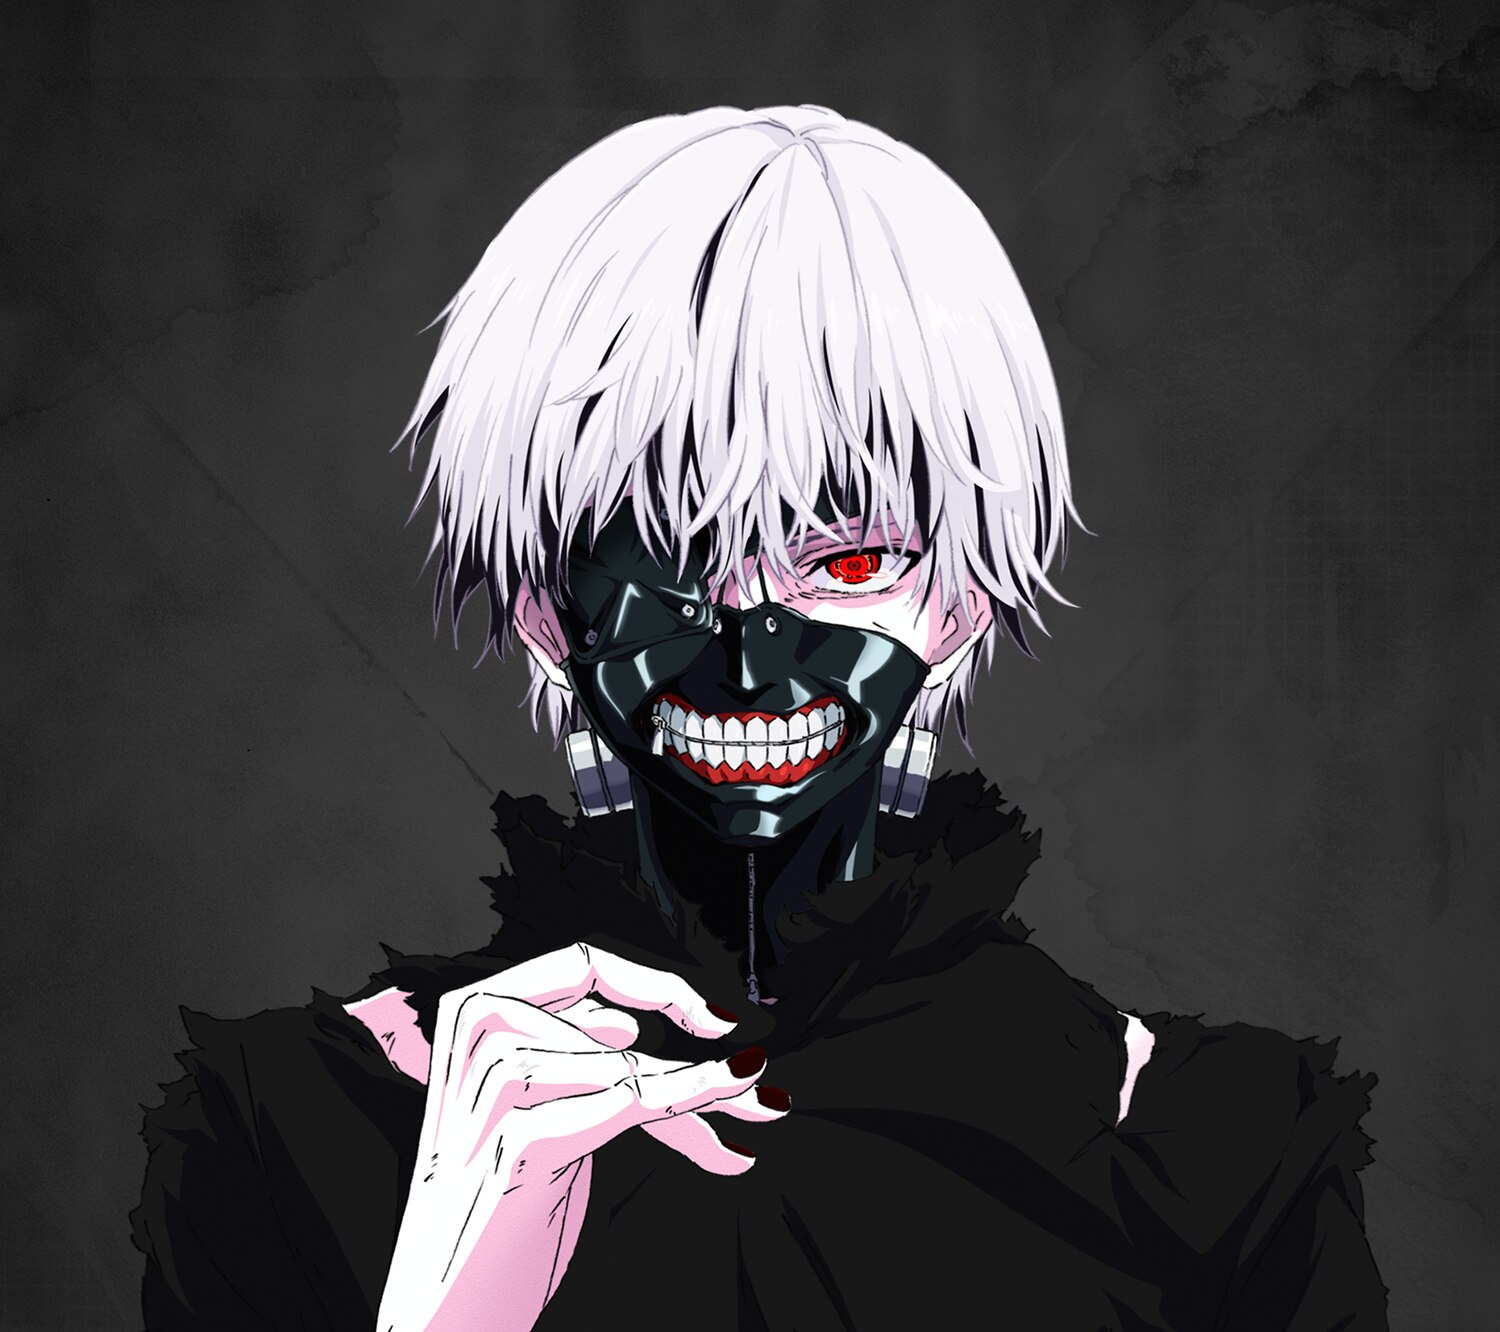 Why do you think Tokyo Ghoul: re anime is skipping, compressing